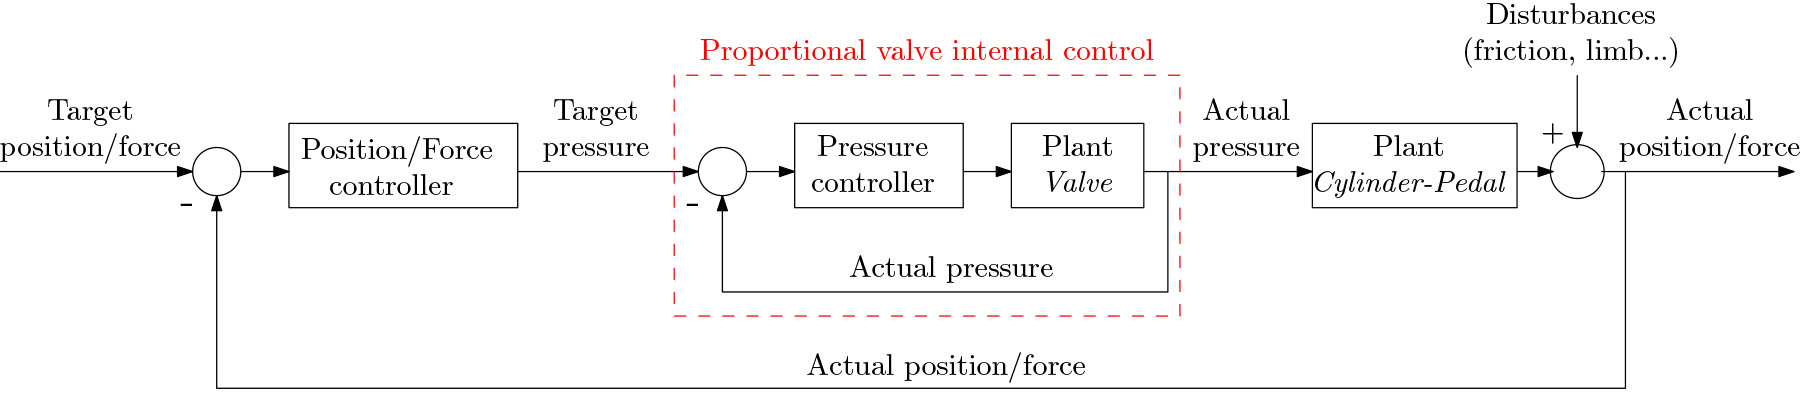 Position/force control loop.